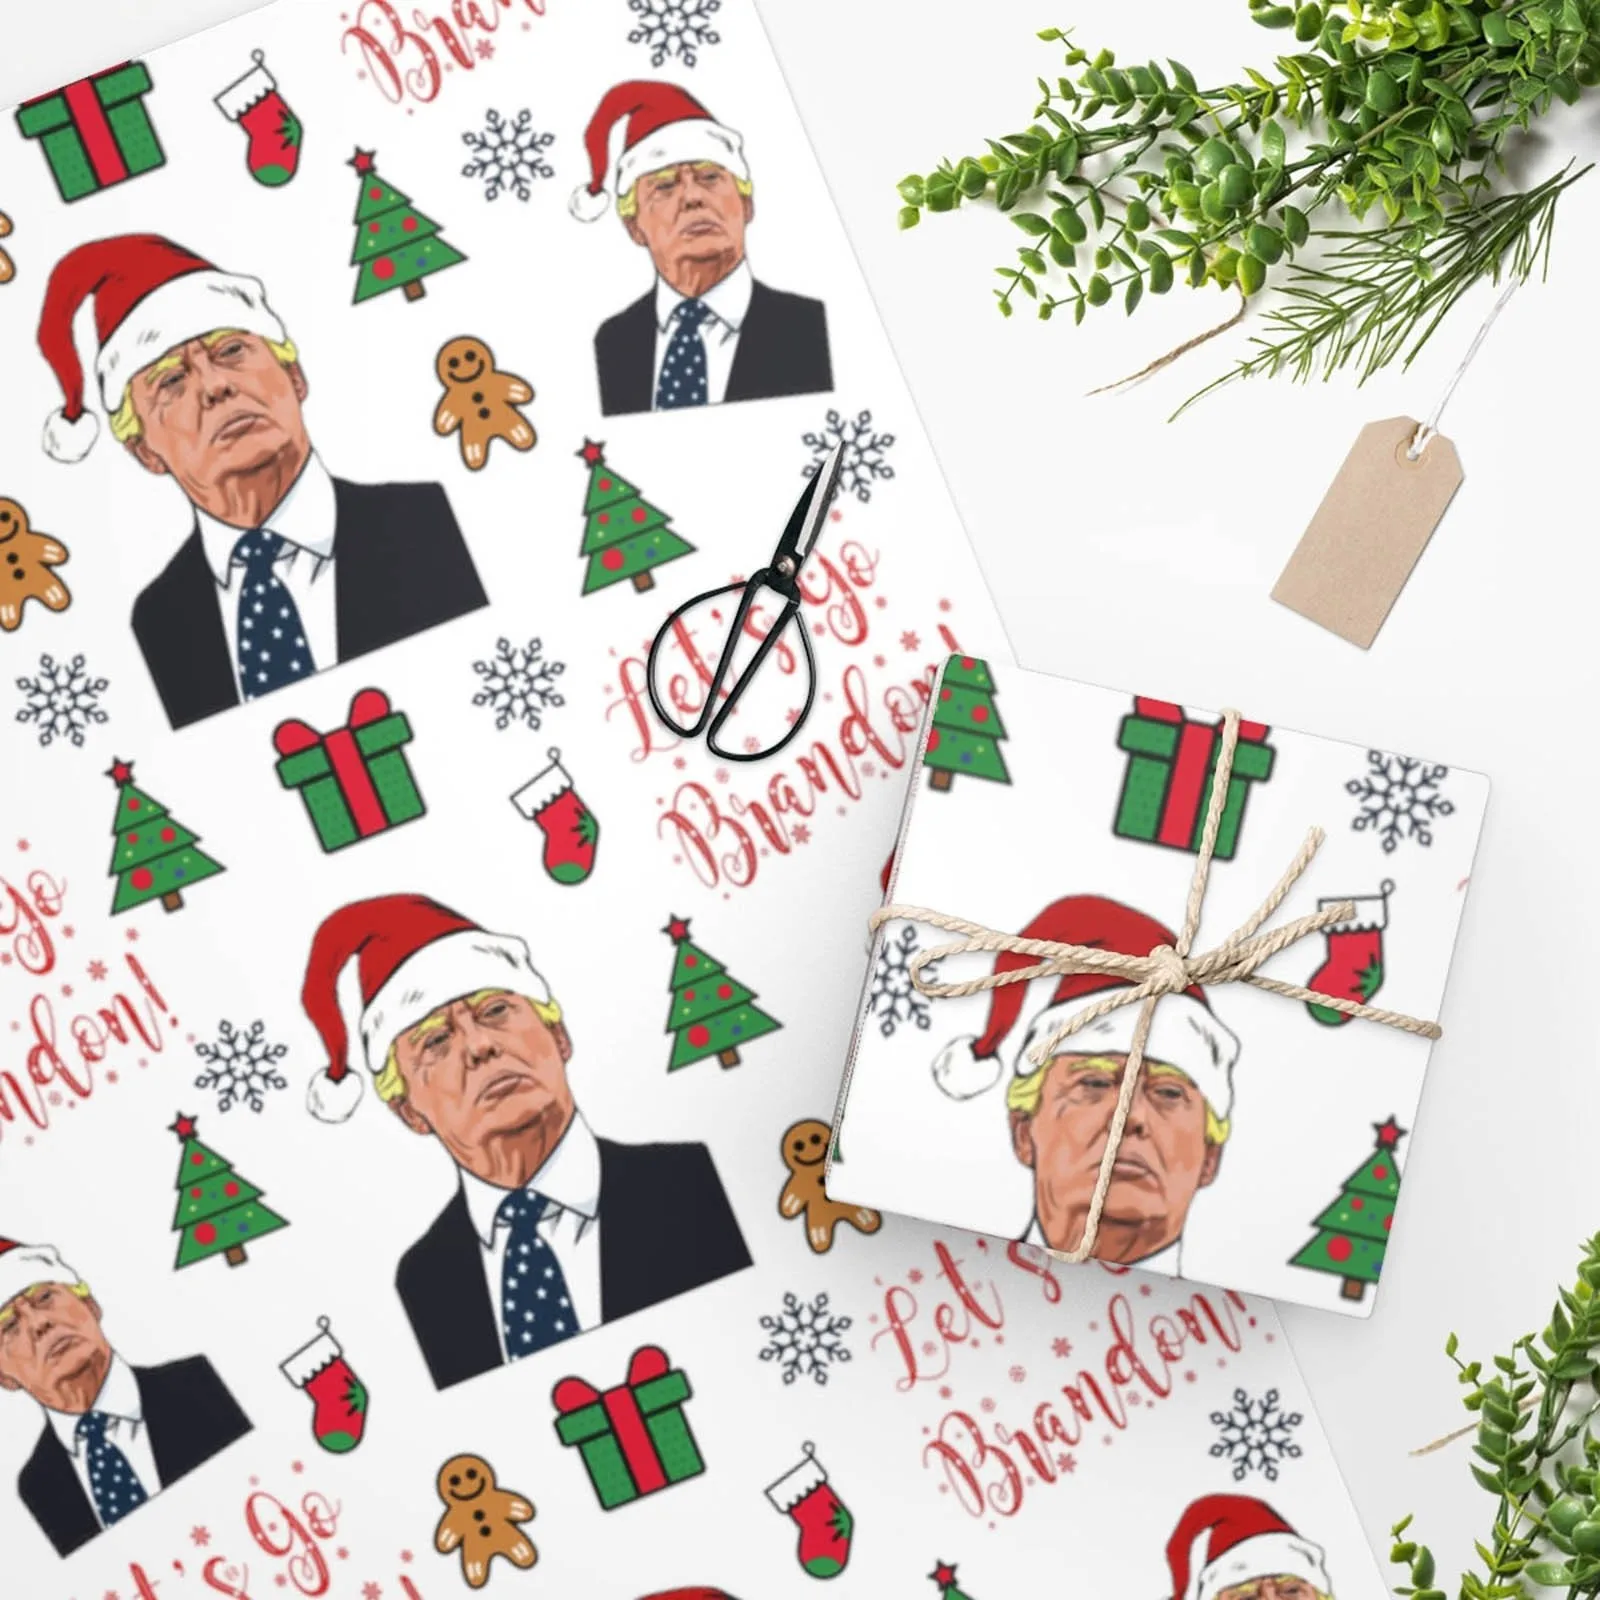 iOPQO Christmas Decorations Clearance Christmas Wrapping Paper 2023  Christmas Wrapping Paper Retro Gift Wrapping Paper Holiday Party Gift Paper  Book Cover Paper Christmas Ornaments 